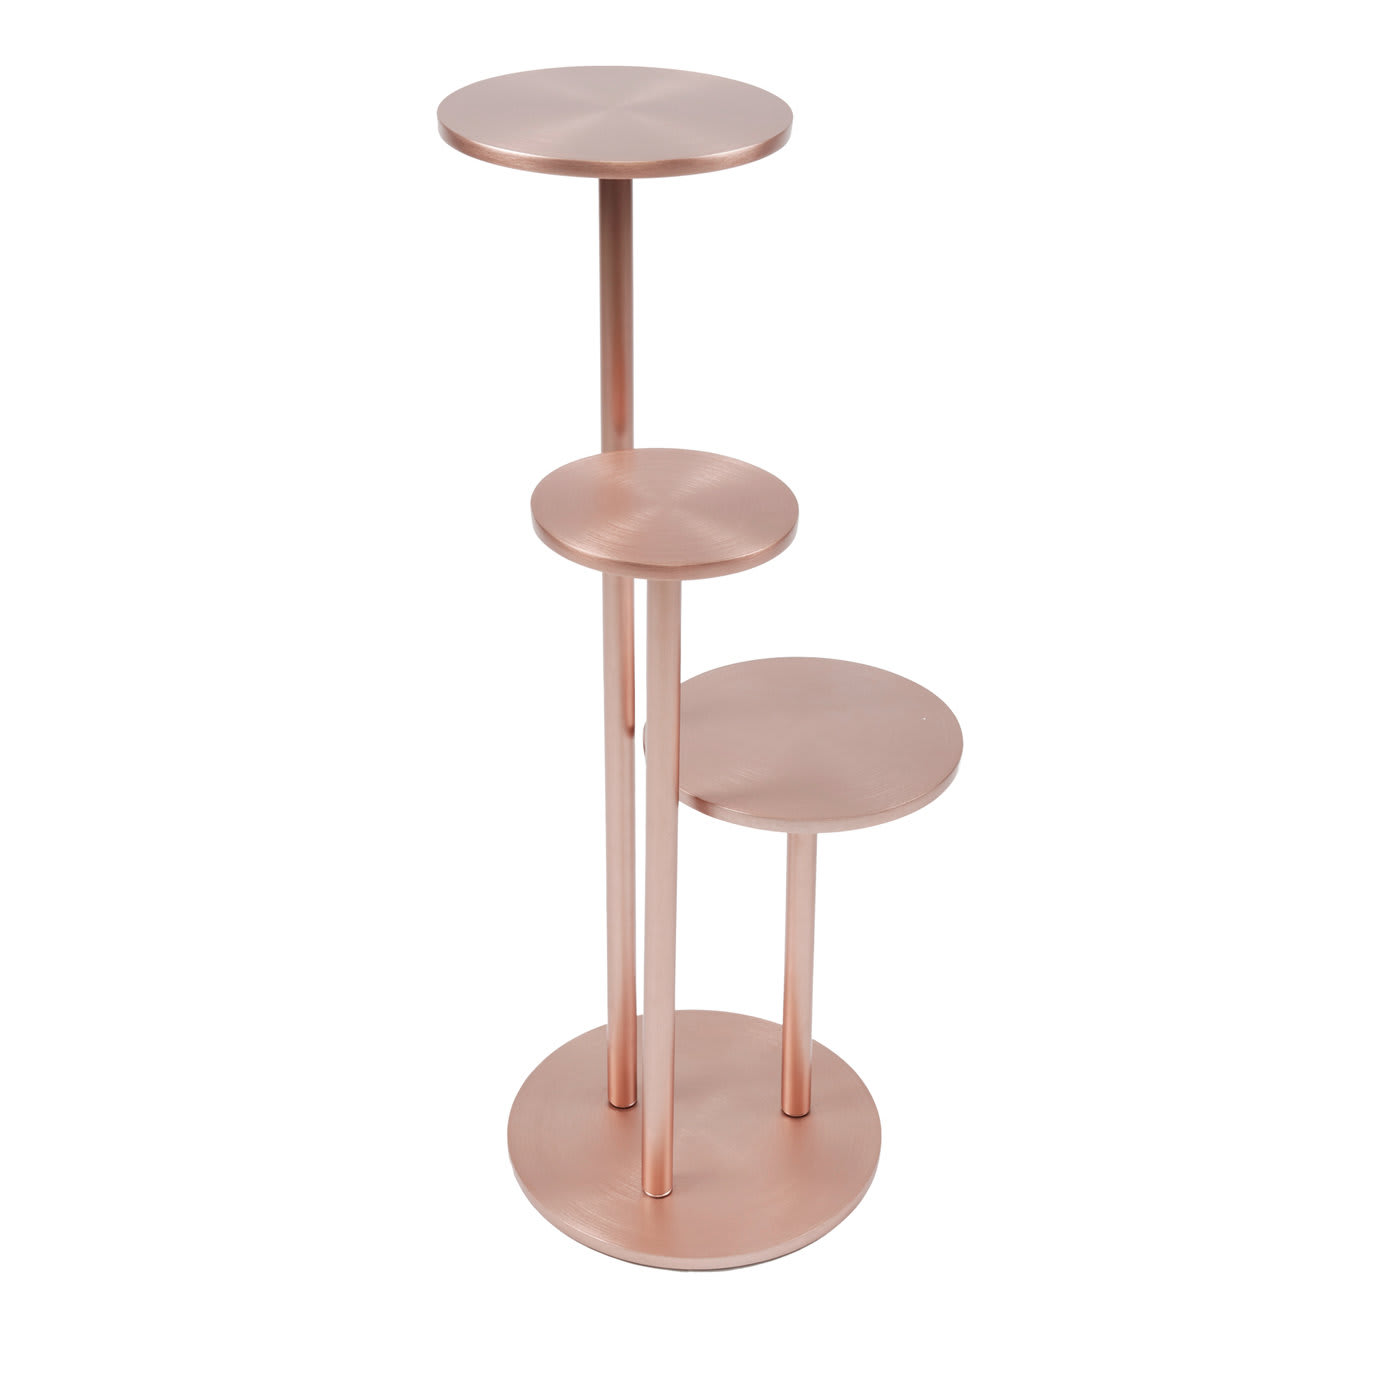 Orion Side Table in Champagne - Secolo